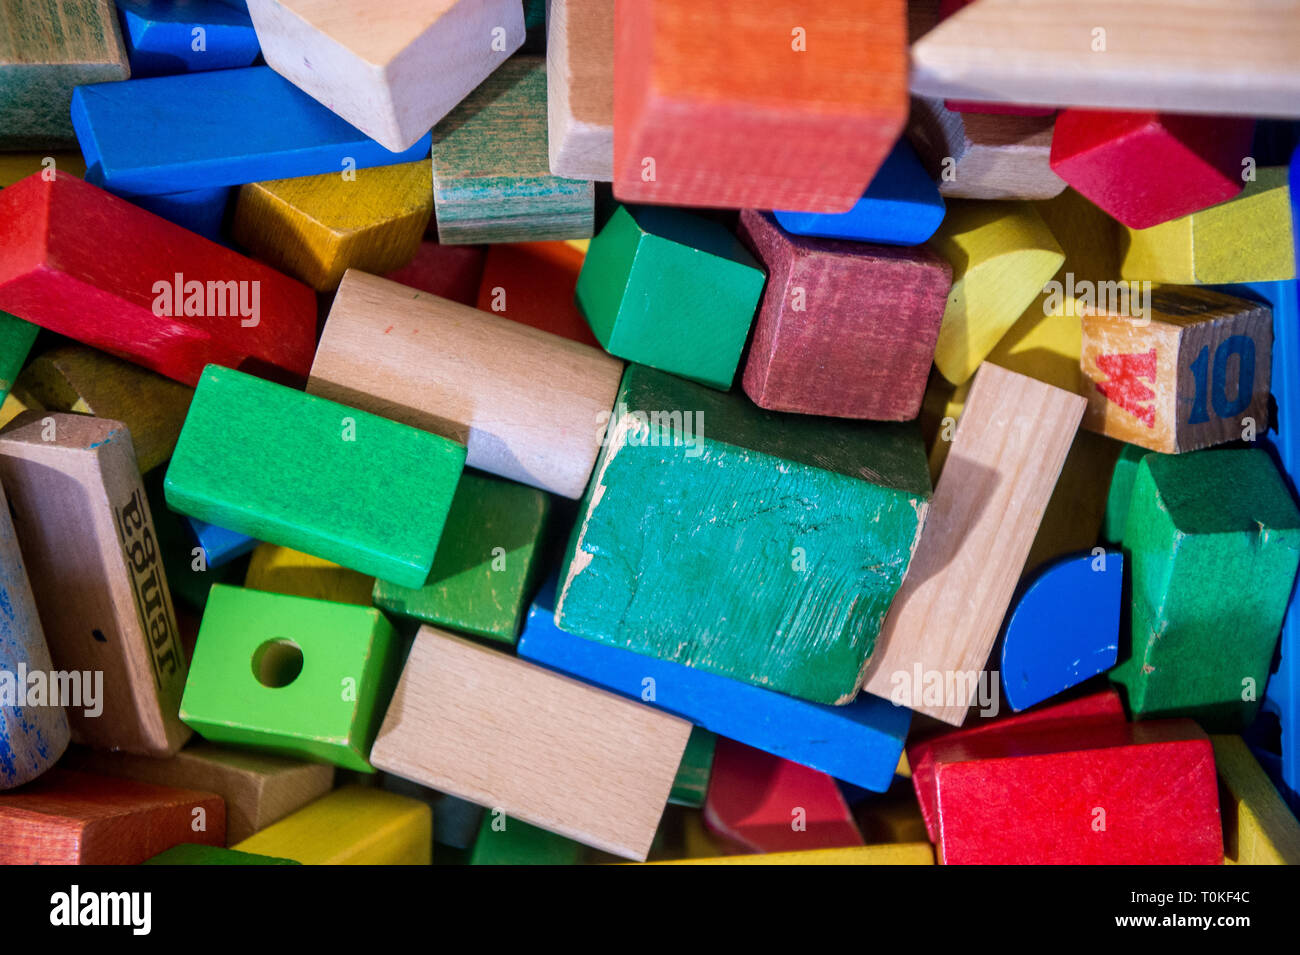 Colourful pile of Childs building blocks Stock Photo